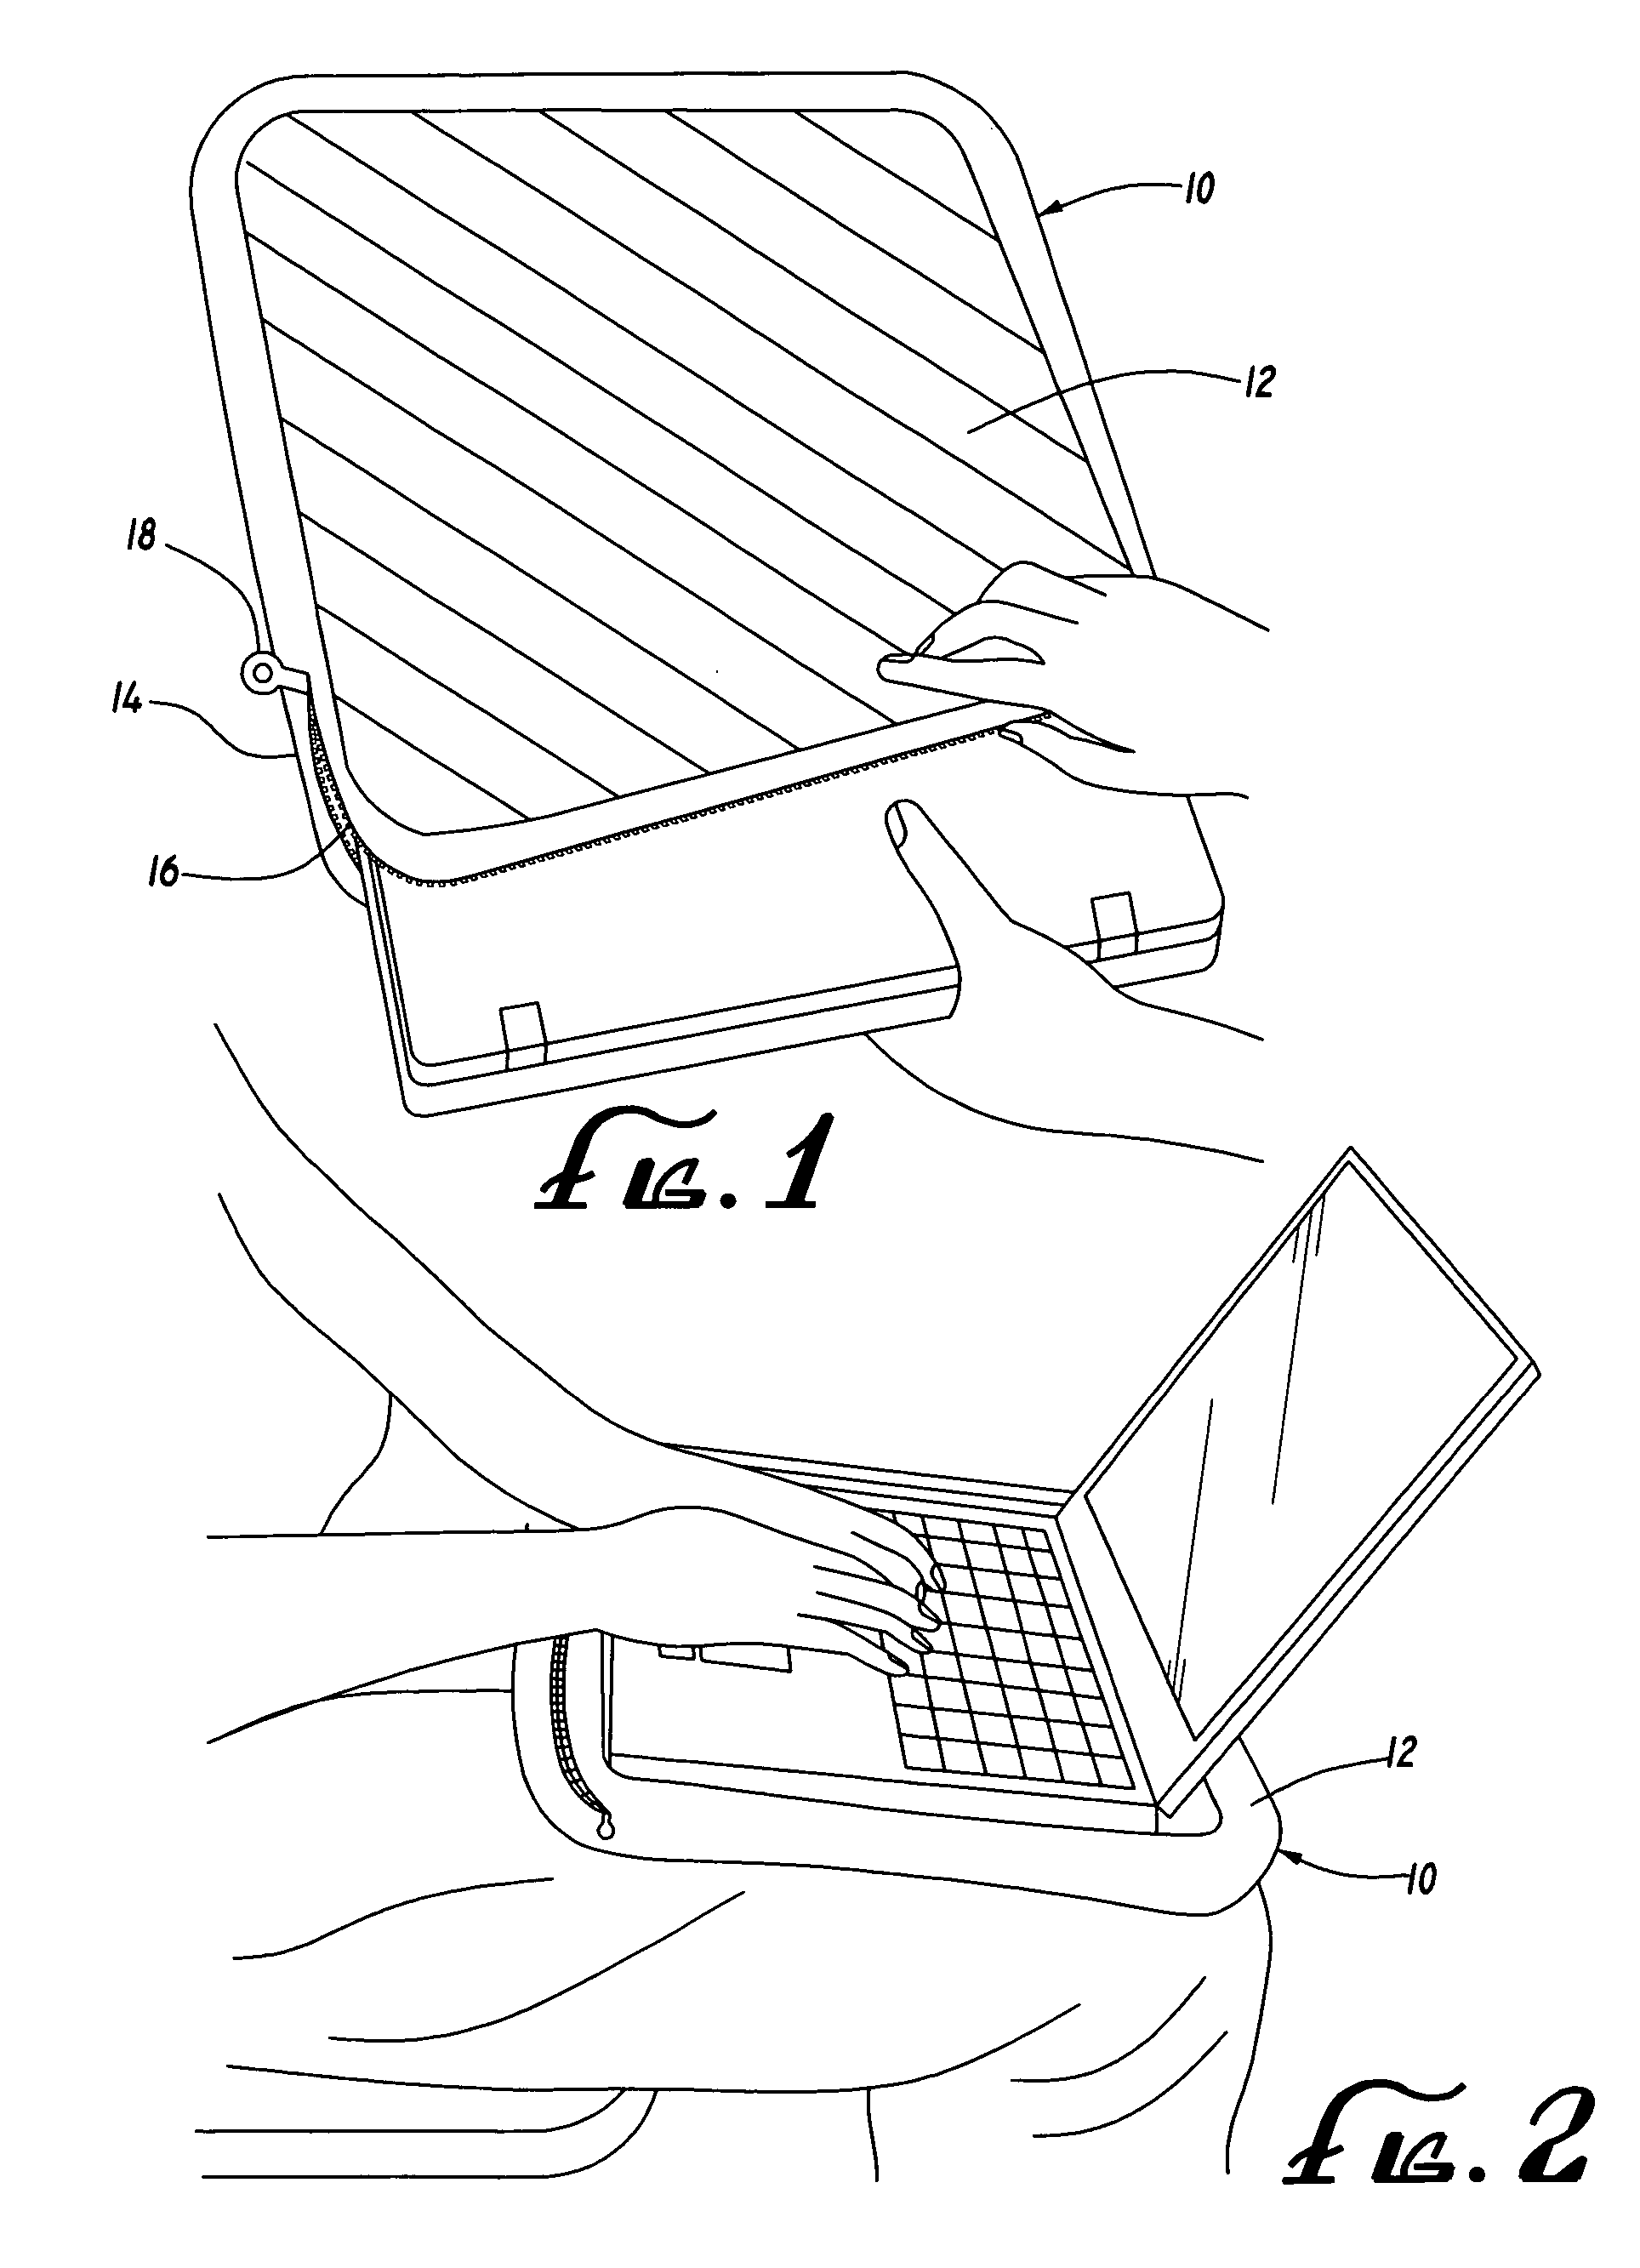 Conductive cooling pad for use with a laptop computer